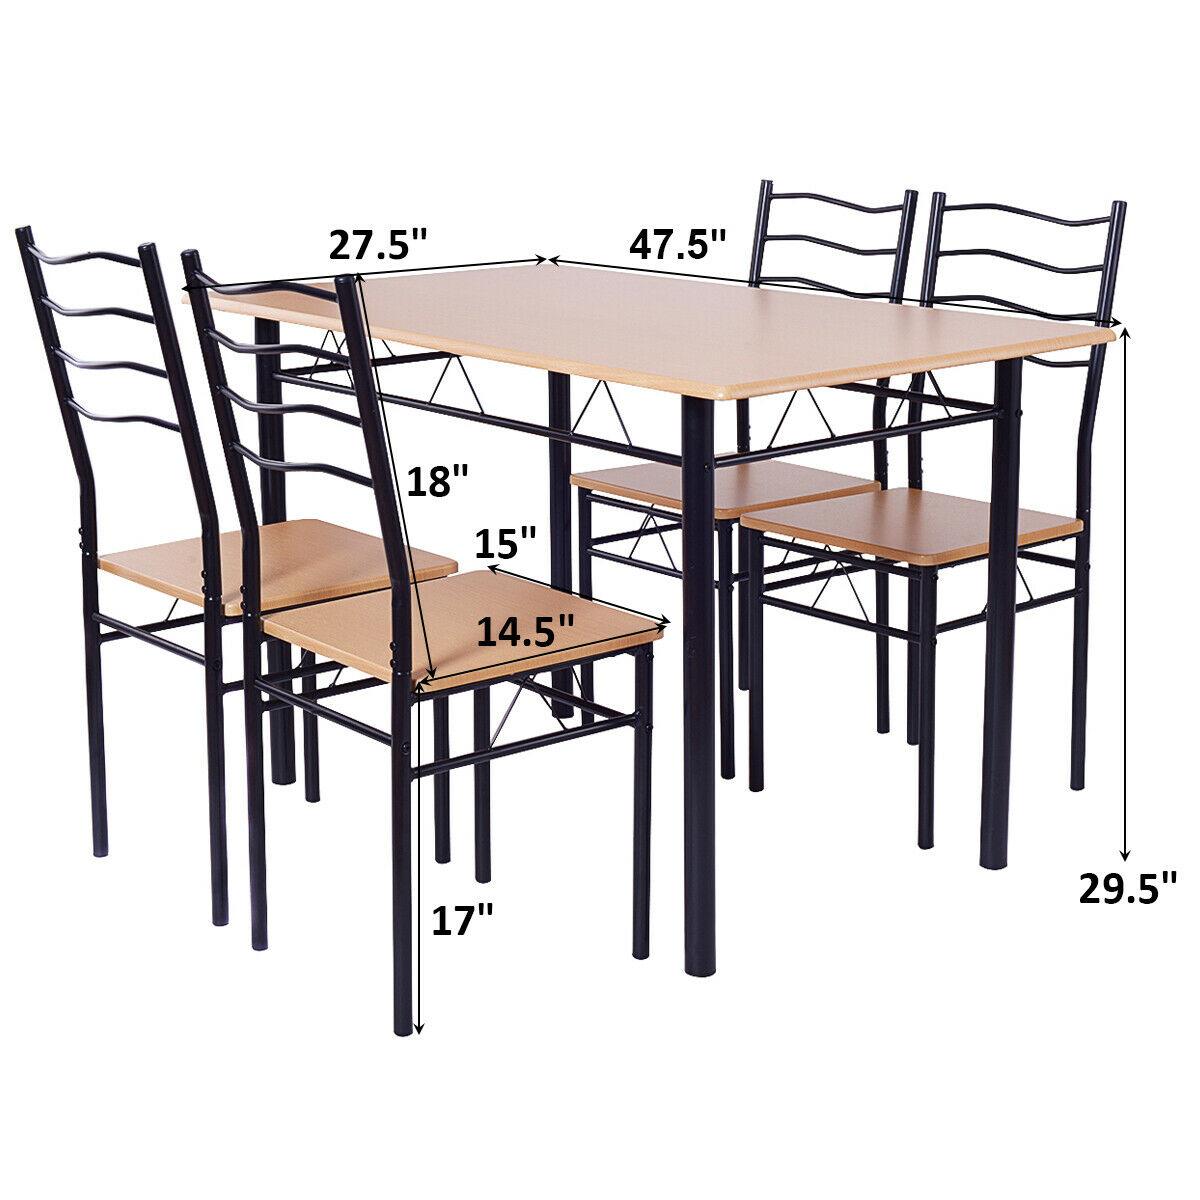 5 Piece Dining Table Set with 4 Chairs Wood Metal Kitchen Breakfast Furniture (FW1)(1U67)